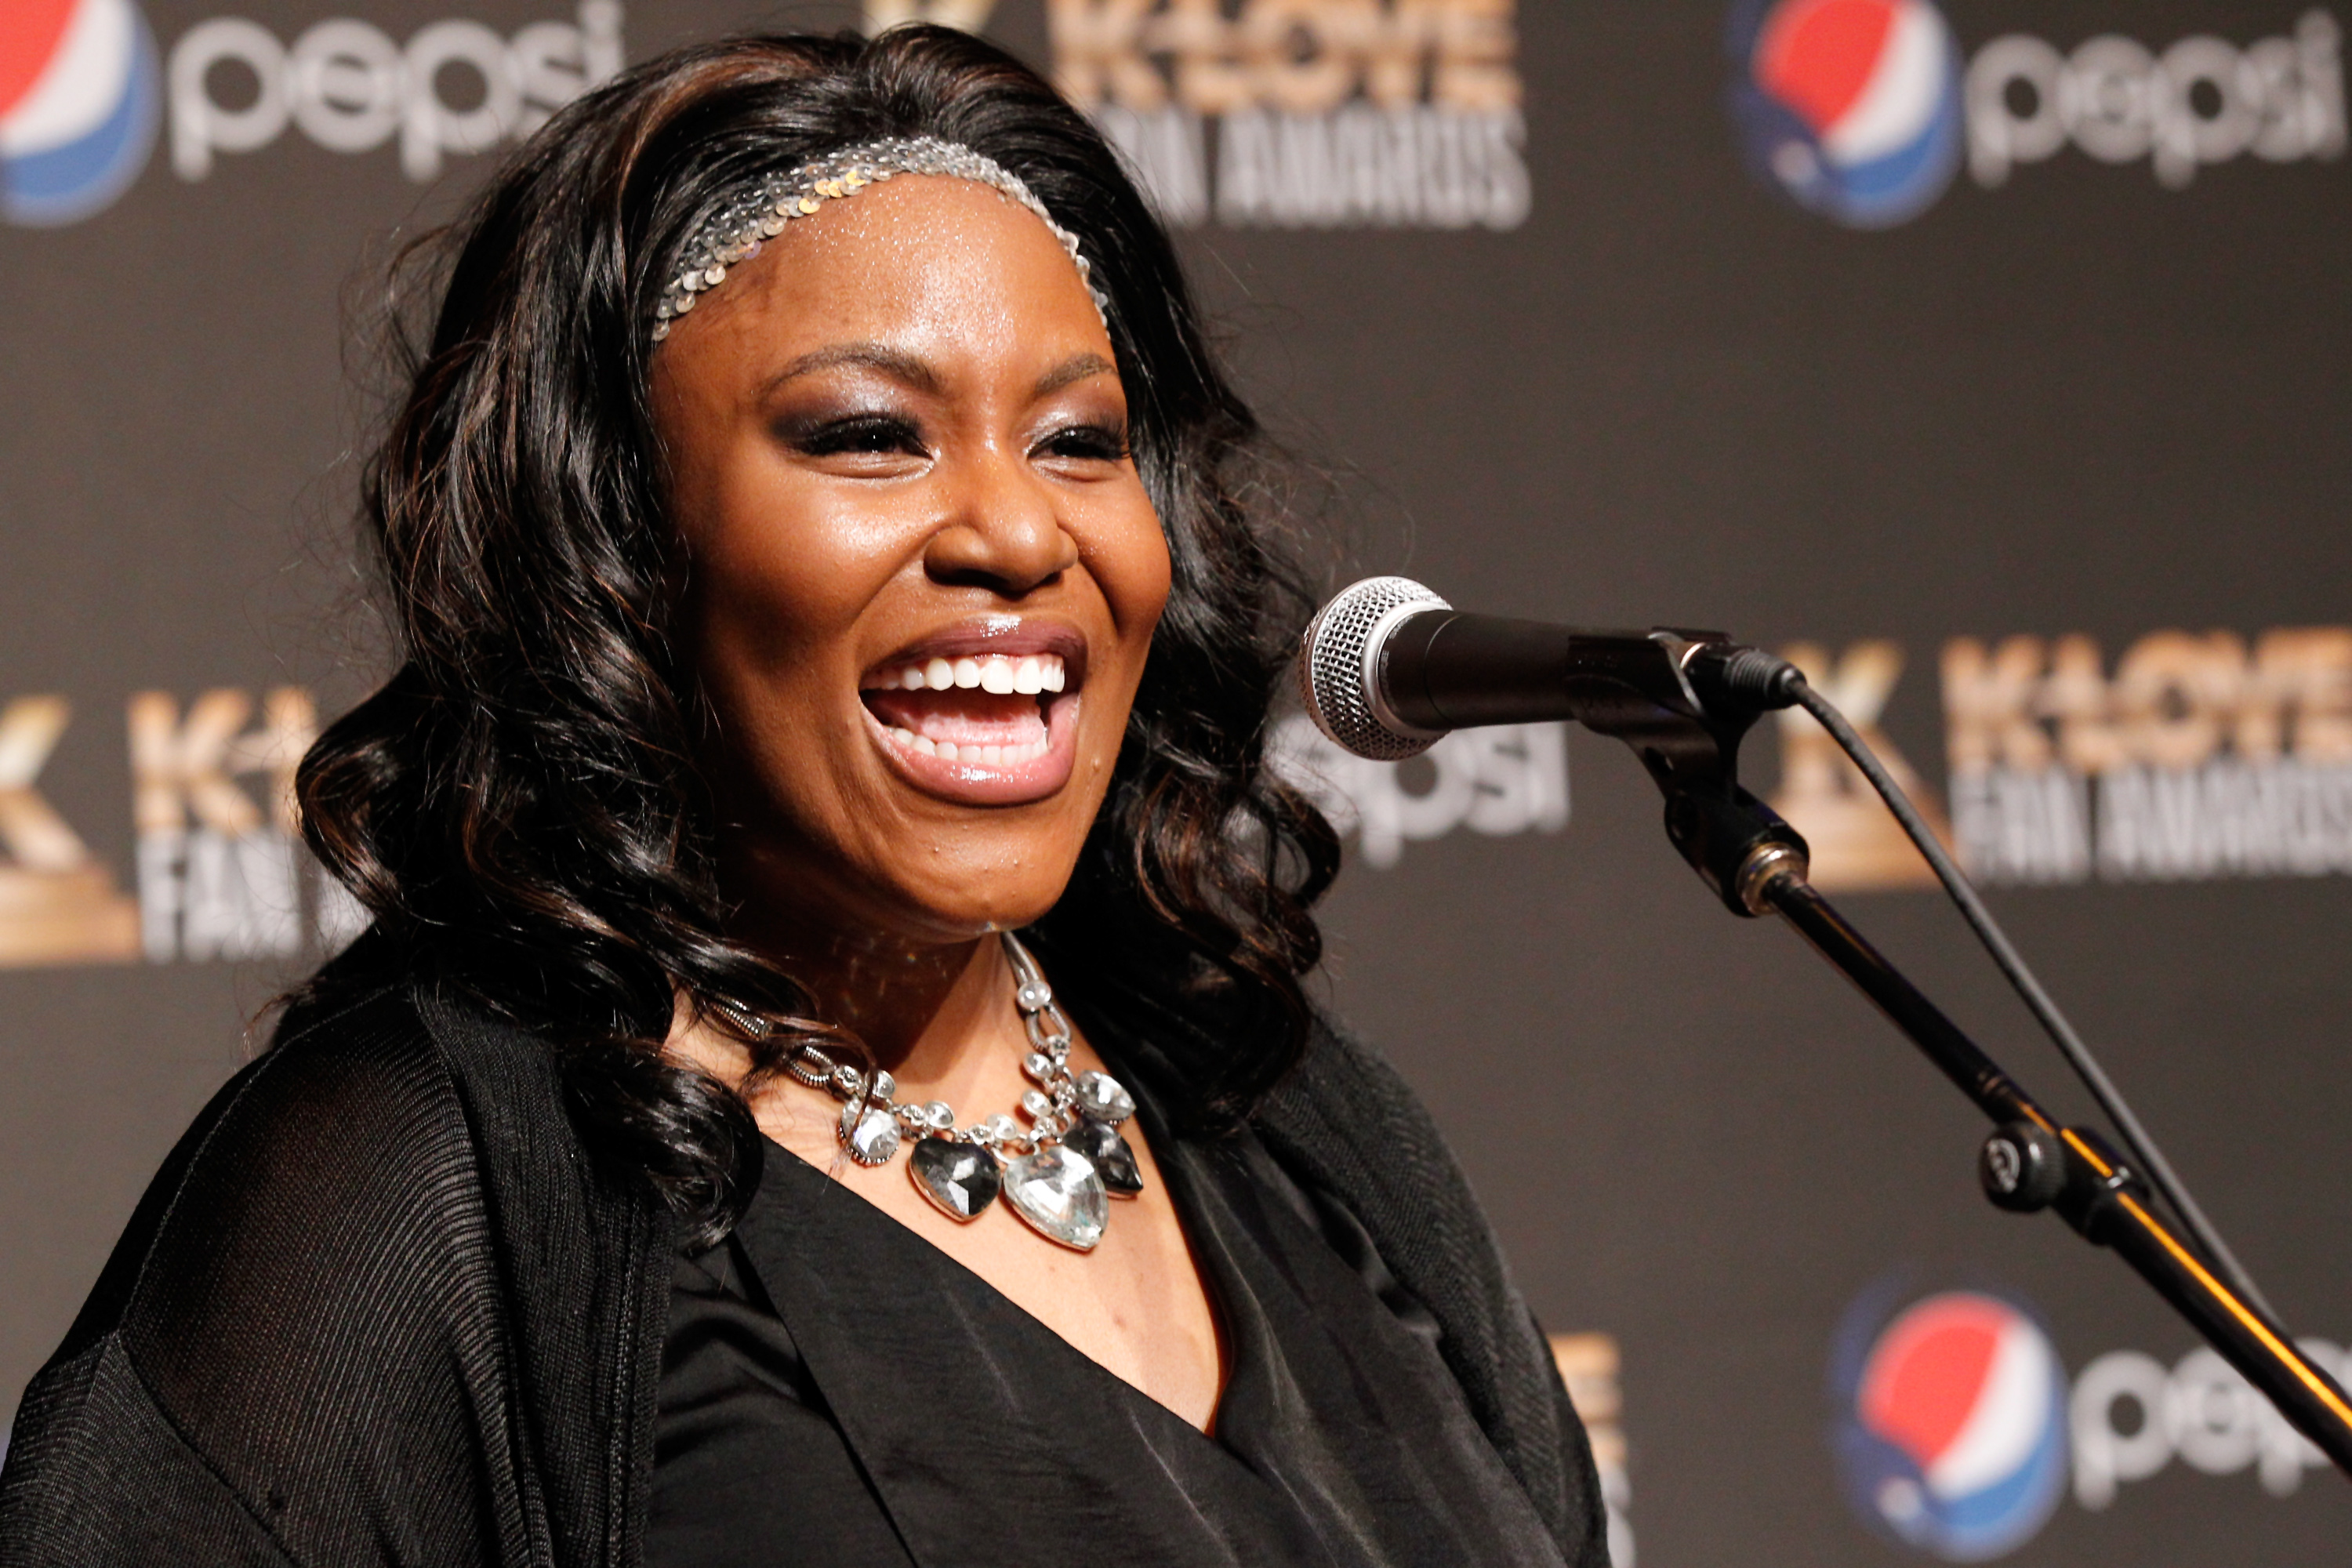 Mandisa Hundley on June 1, 2014, in Nashville, Tennessee. | Source: Getty Images